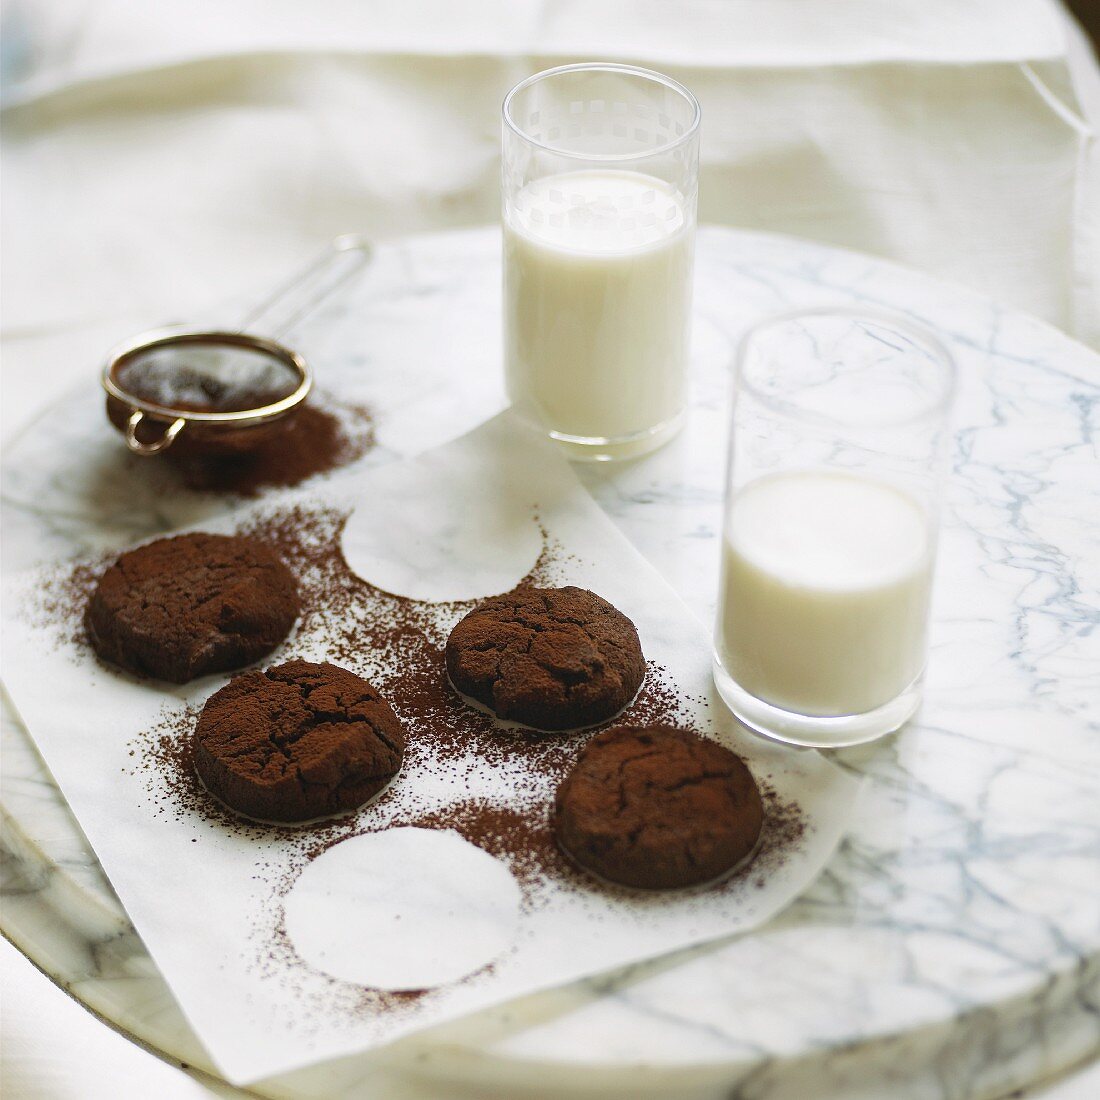 Chocolate cookies and two glasses of milk